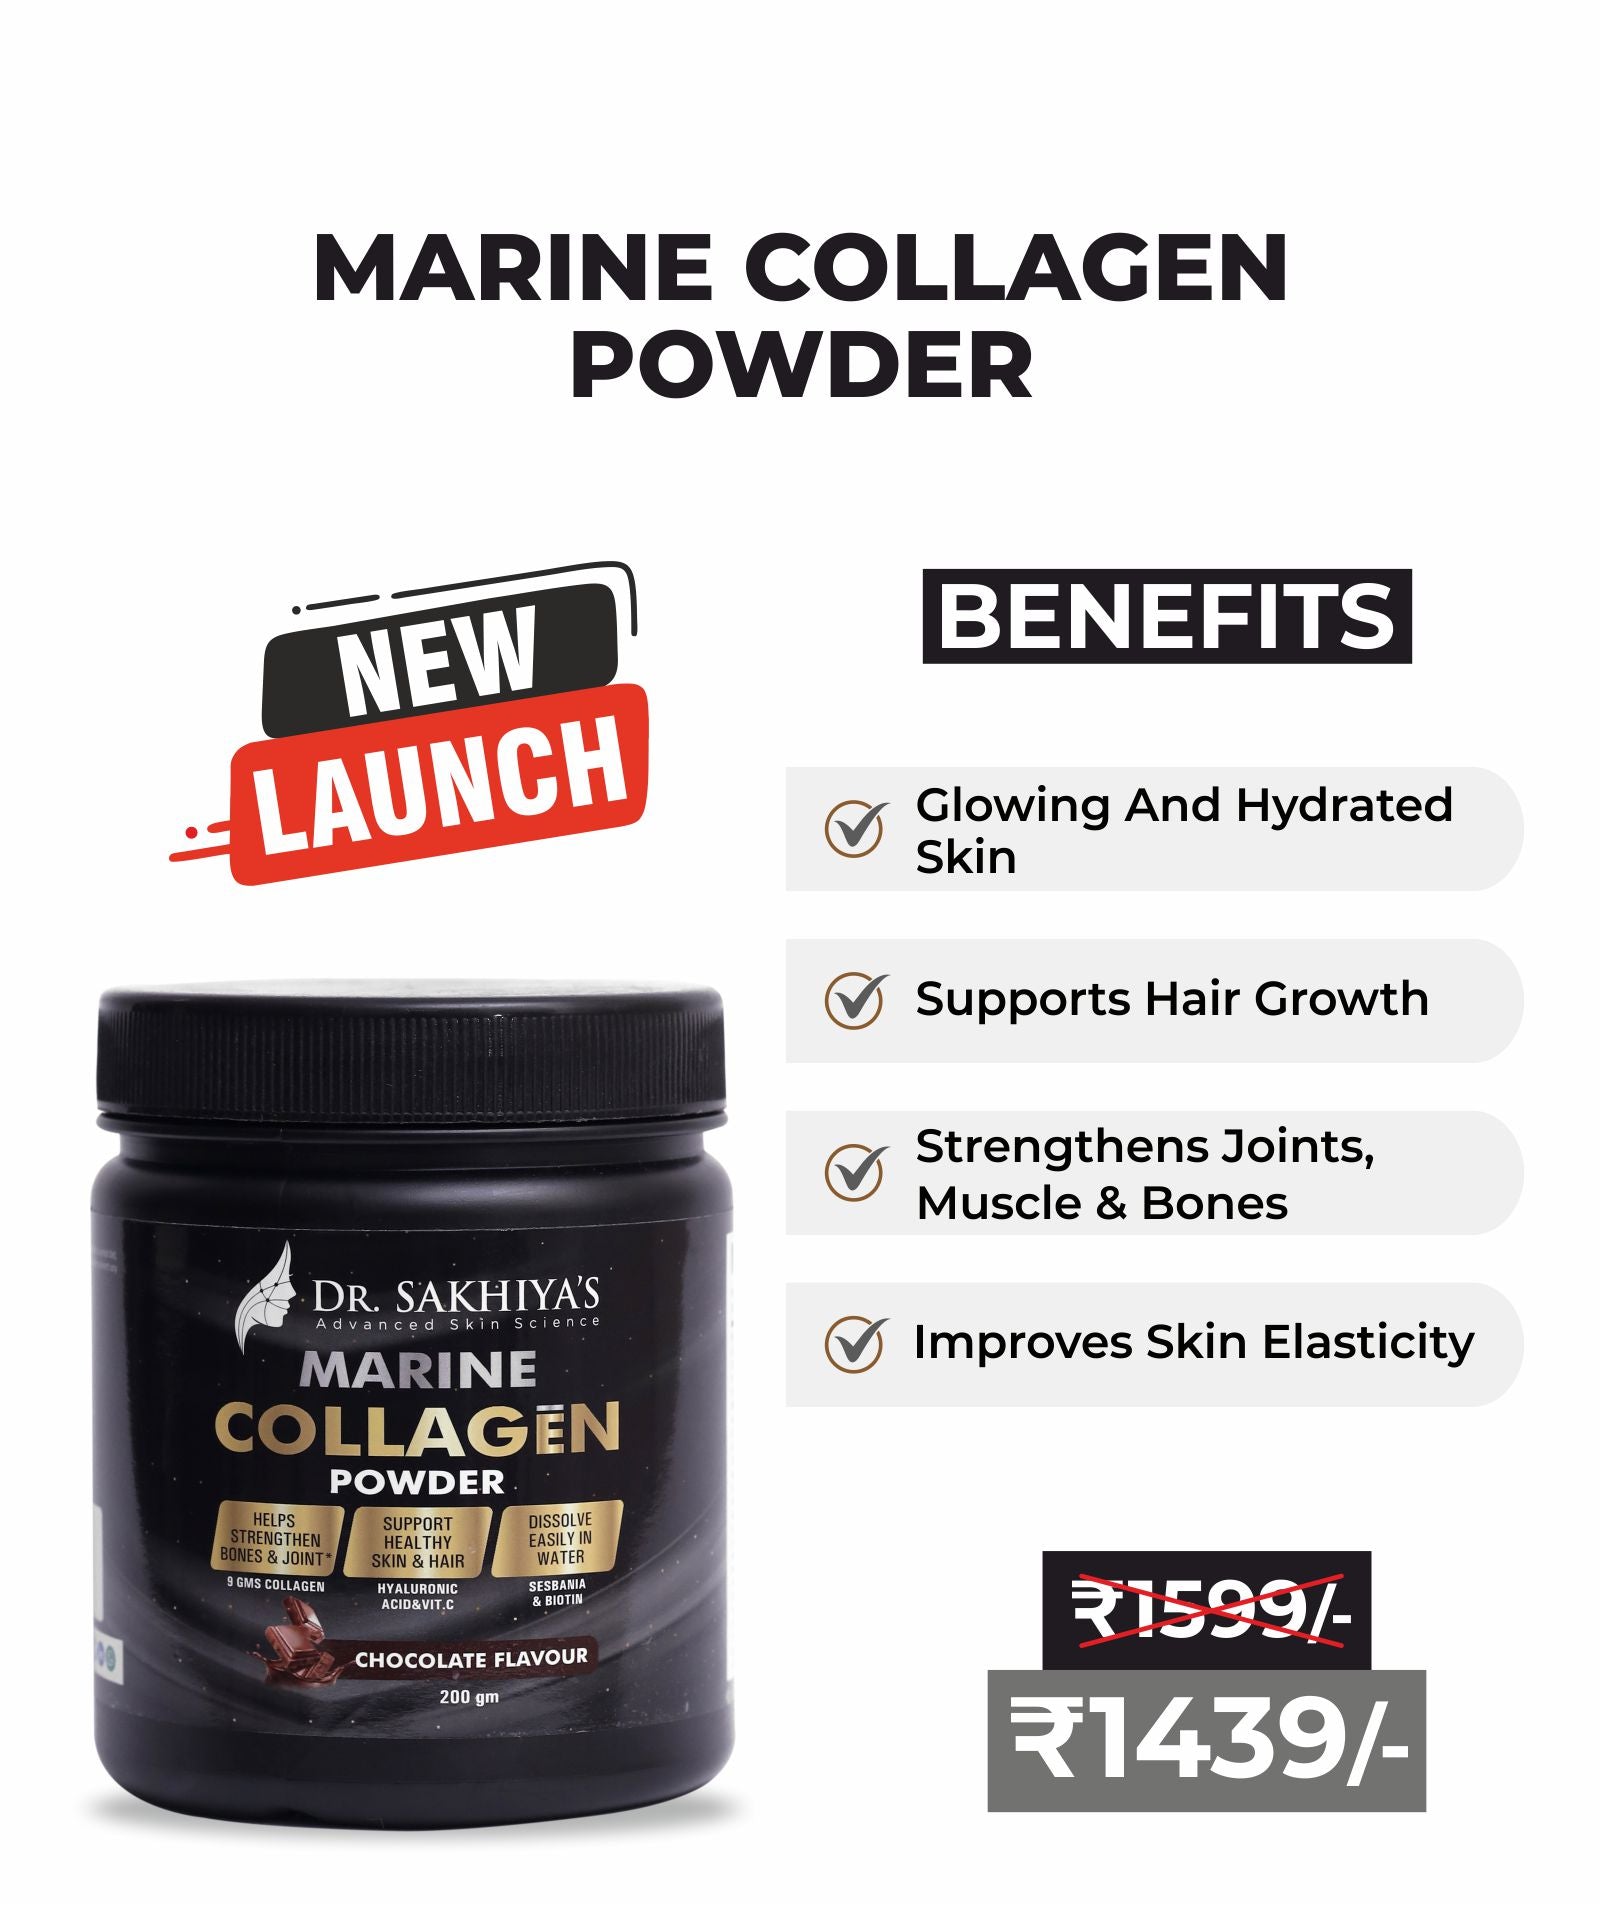 Dr. Sakhiya Marine Collagen Powder - 200gm - Support Healthy Skin And Hair - Strengthens Bones And Joints